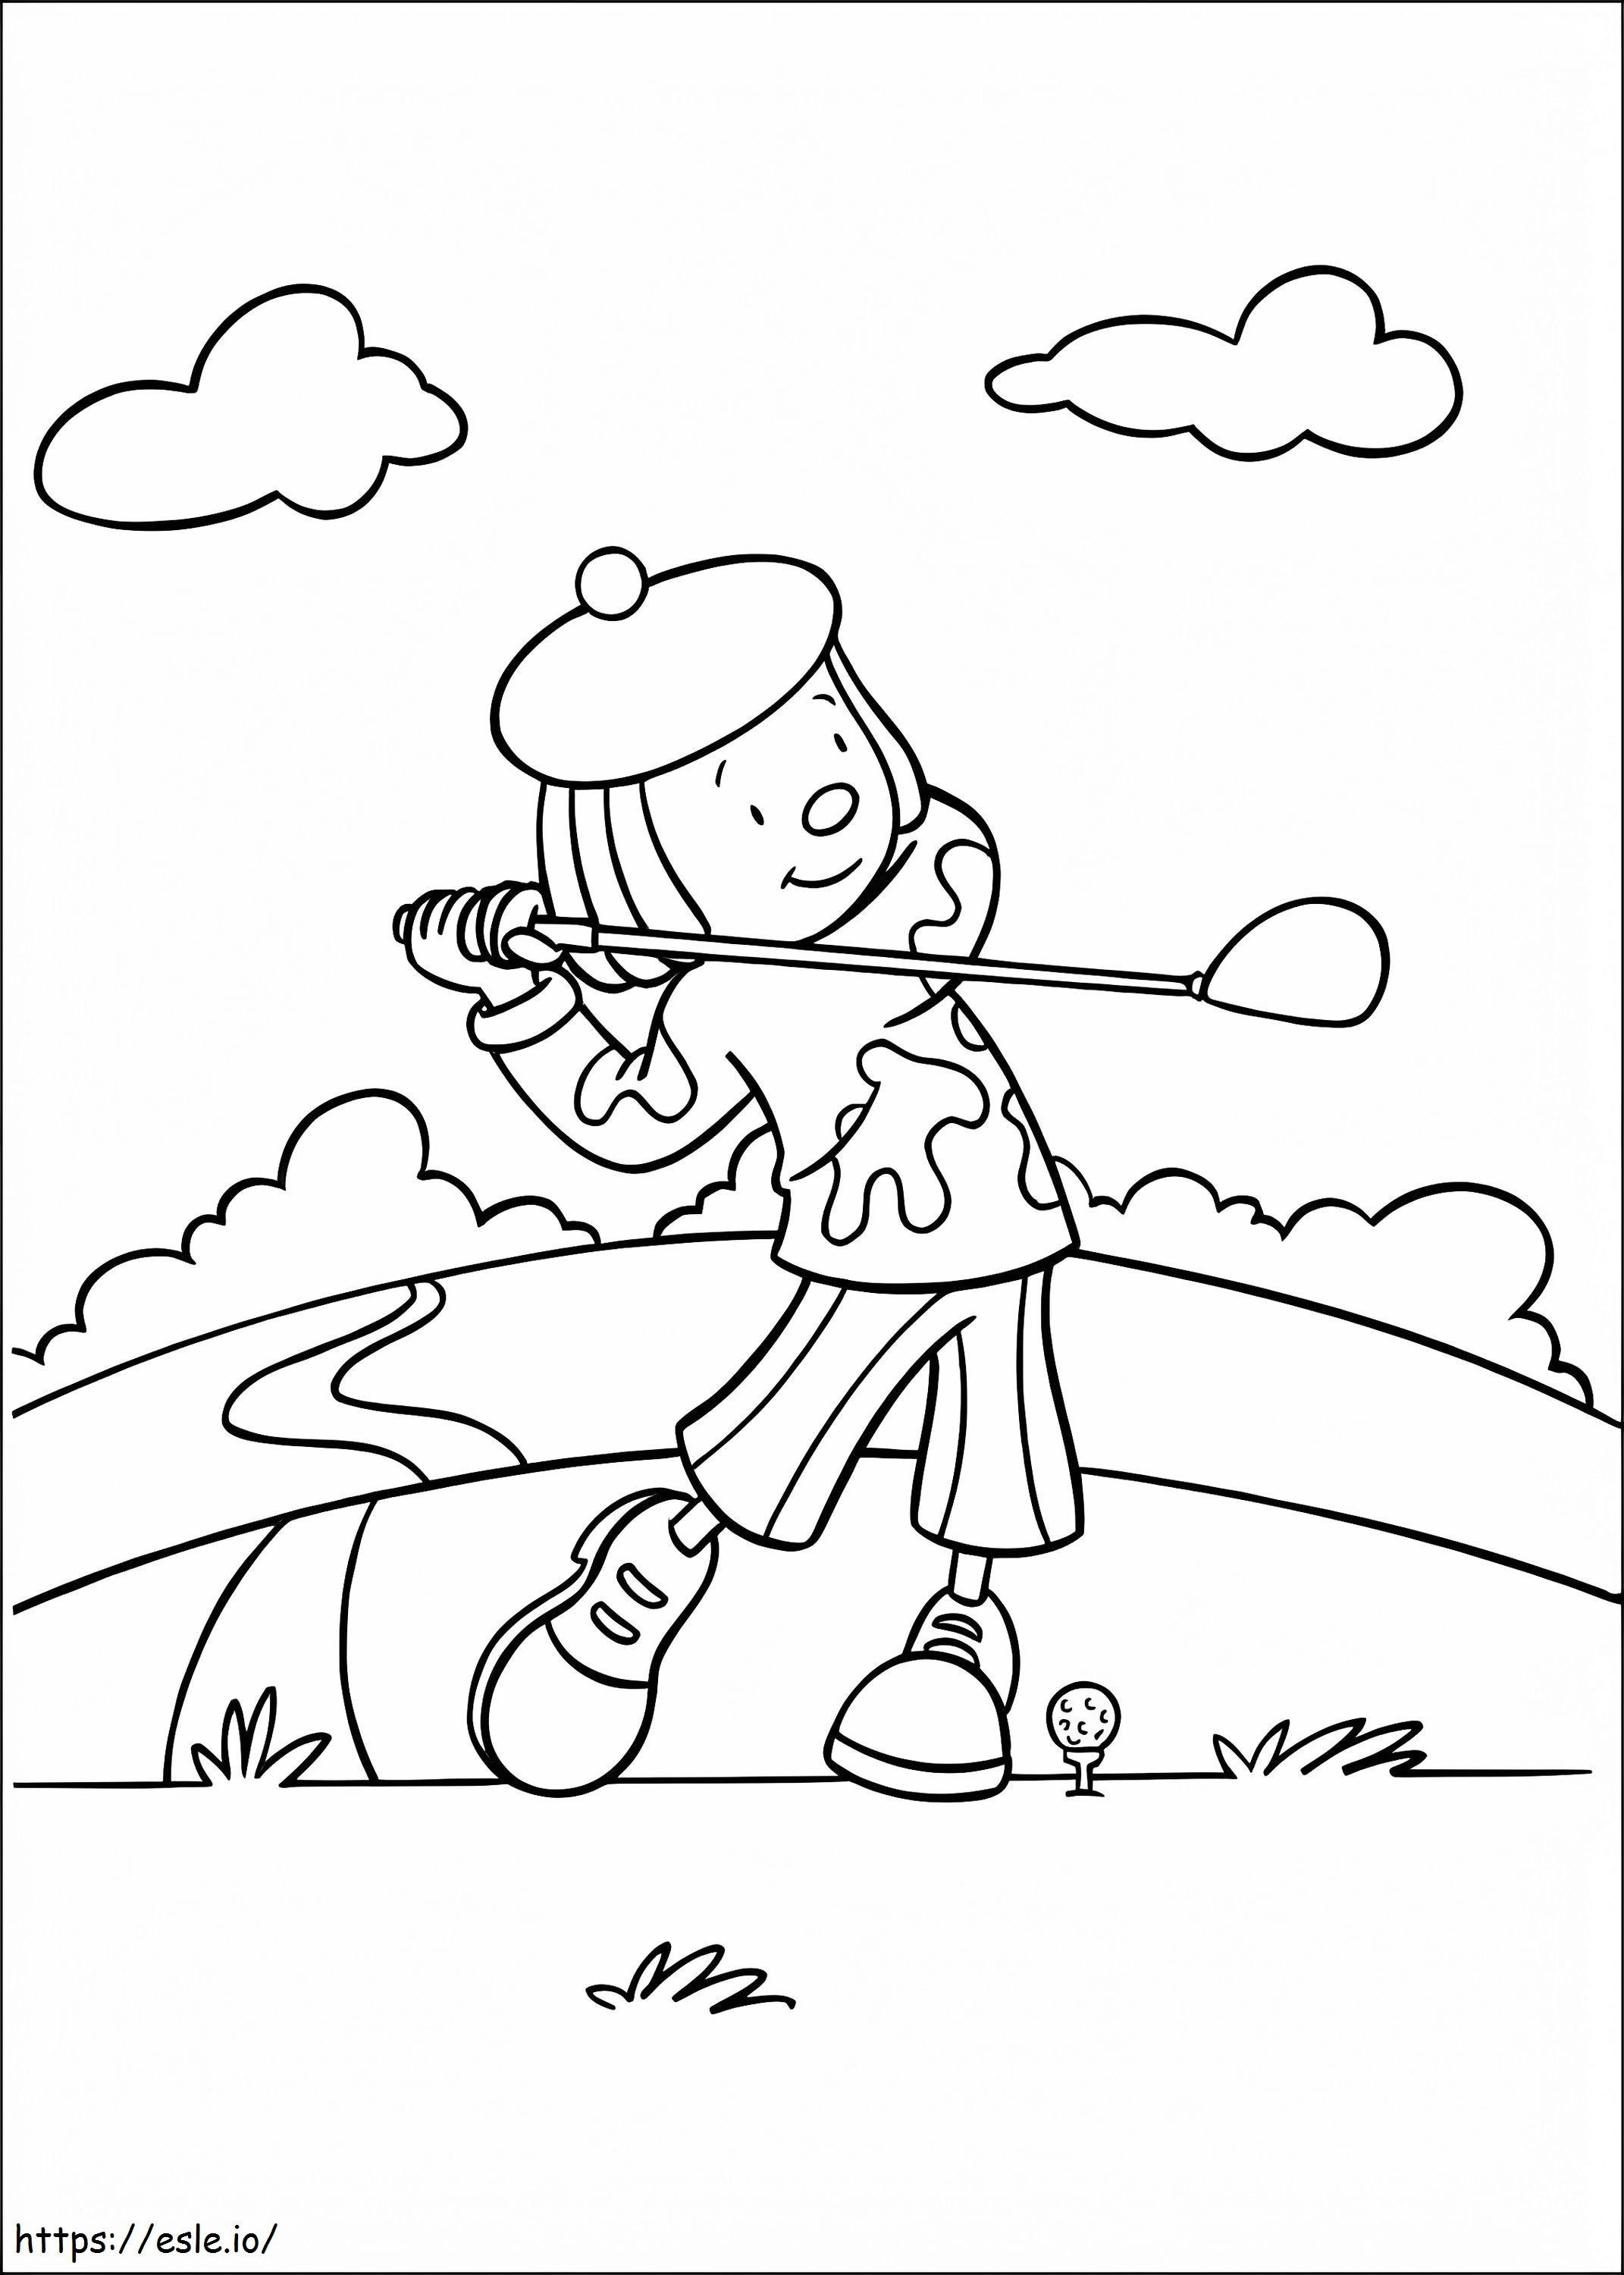 JoJo Tickle Playing Golf coloring page